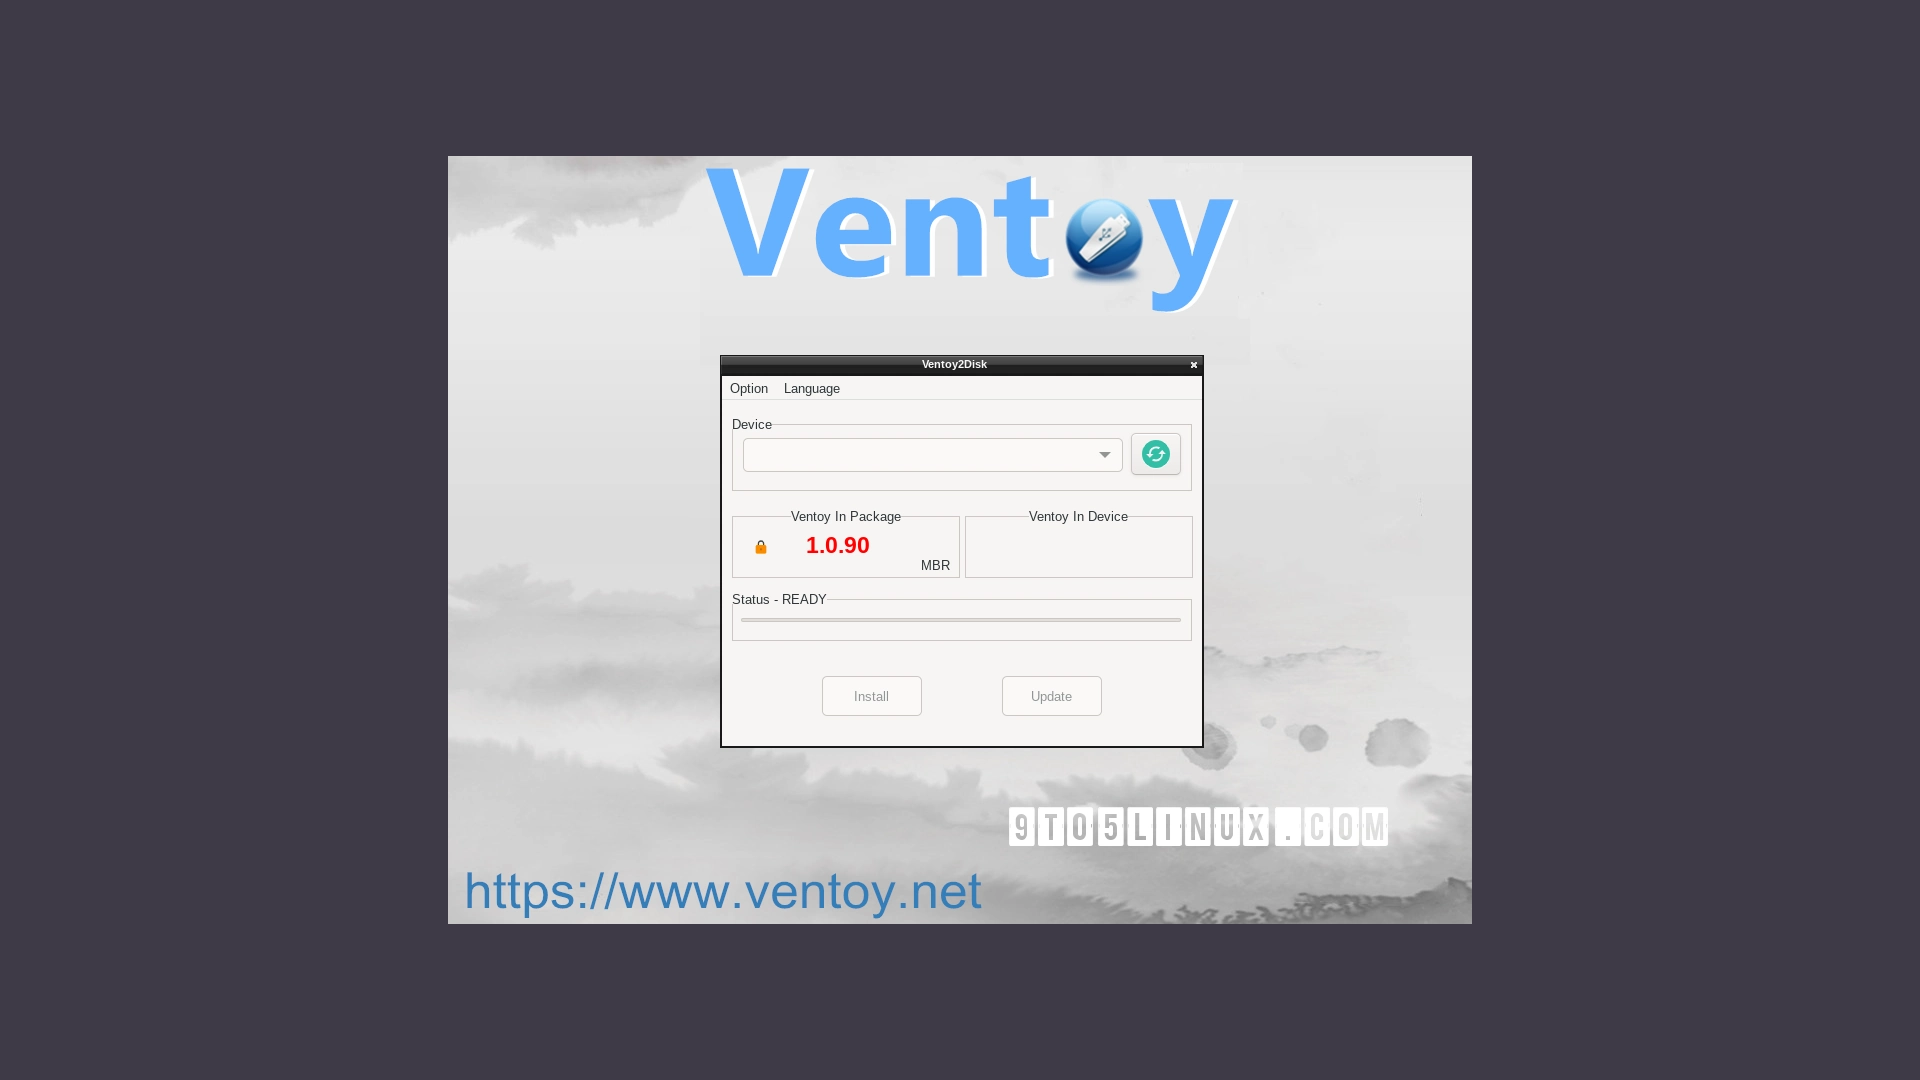 Ventoy 1.0.90 Adds Support for LibreELEC 11.0 and Chimera Linux